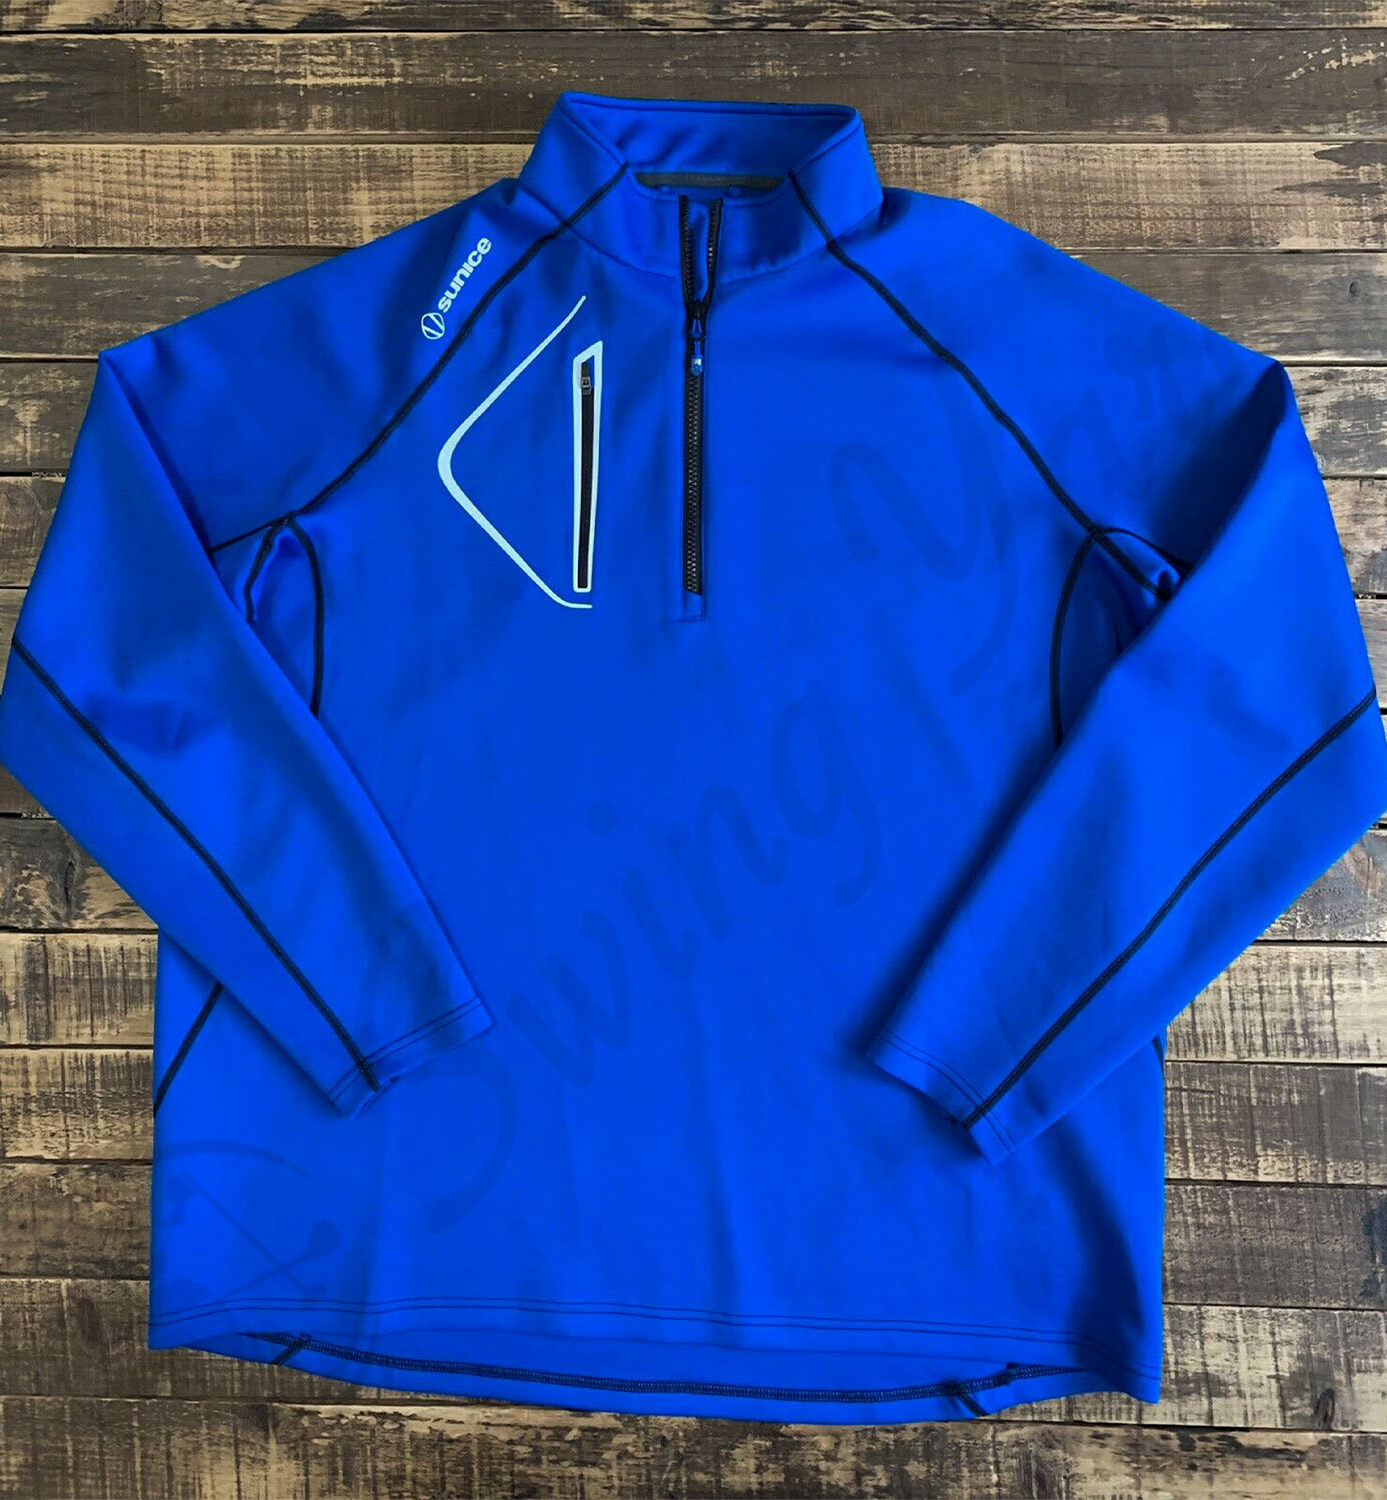 My new blue Sunice allendale men’s thermal golf jacket pullover on the floor